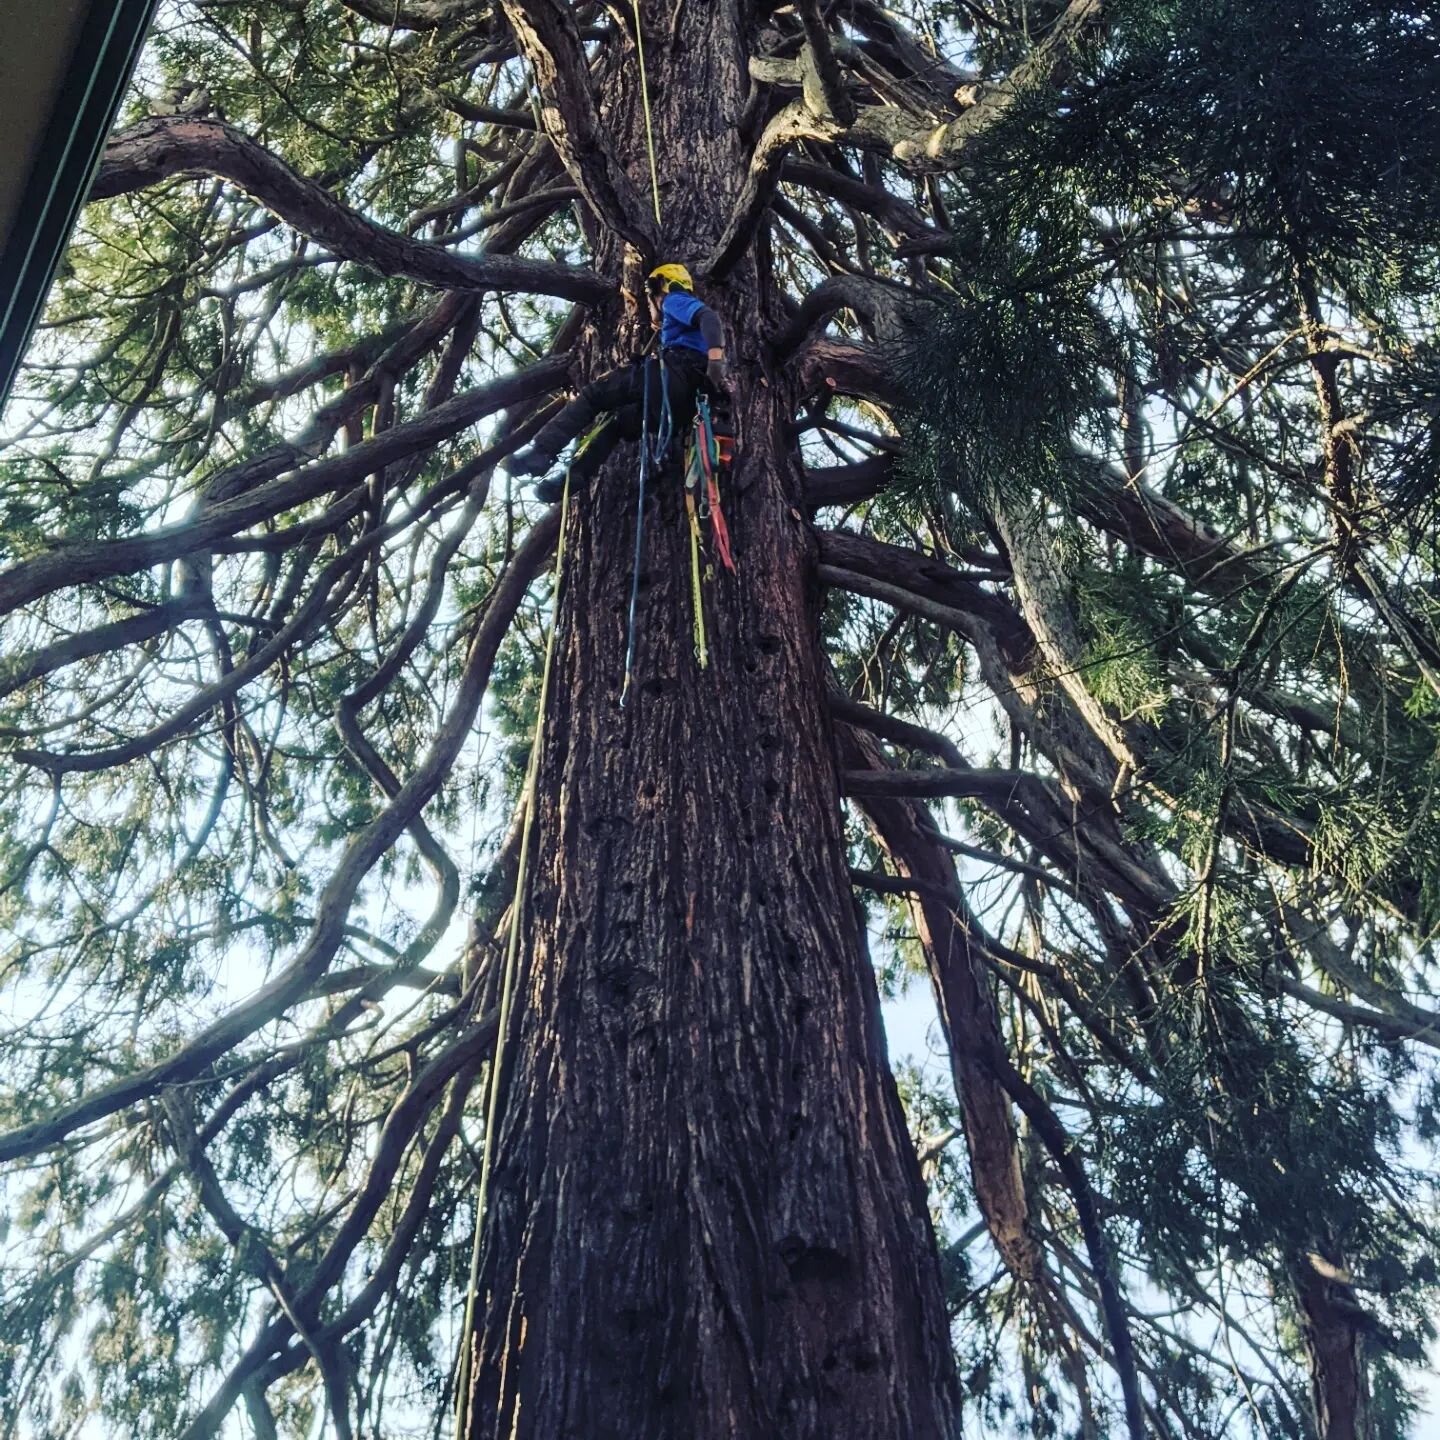 Been waiting a while to climb this beautiful Sequoia today in Victoria!
That's jasper in his first redwood ascent😎
Dangerous lower canopy limbs to be removed and interior dieback.
...and it's not raining👍
#sequoia #treeclimber #treesurgeon #yyj #bi